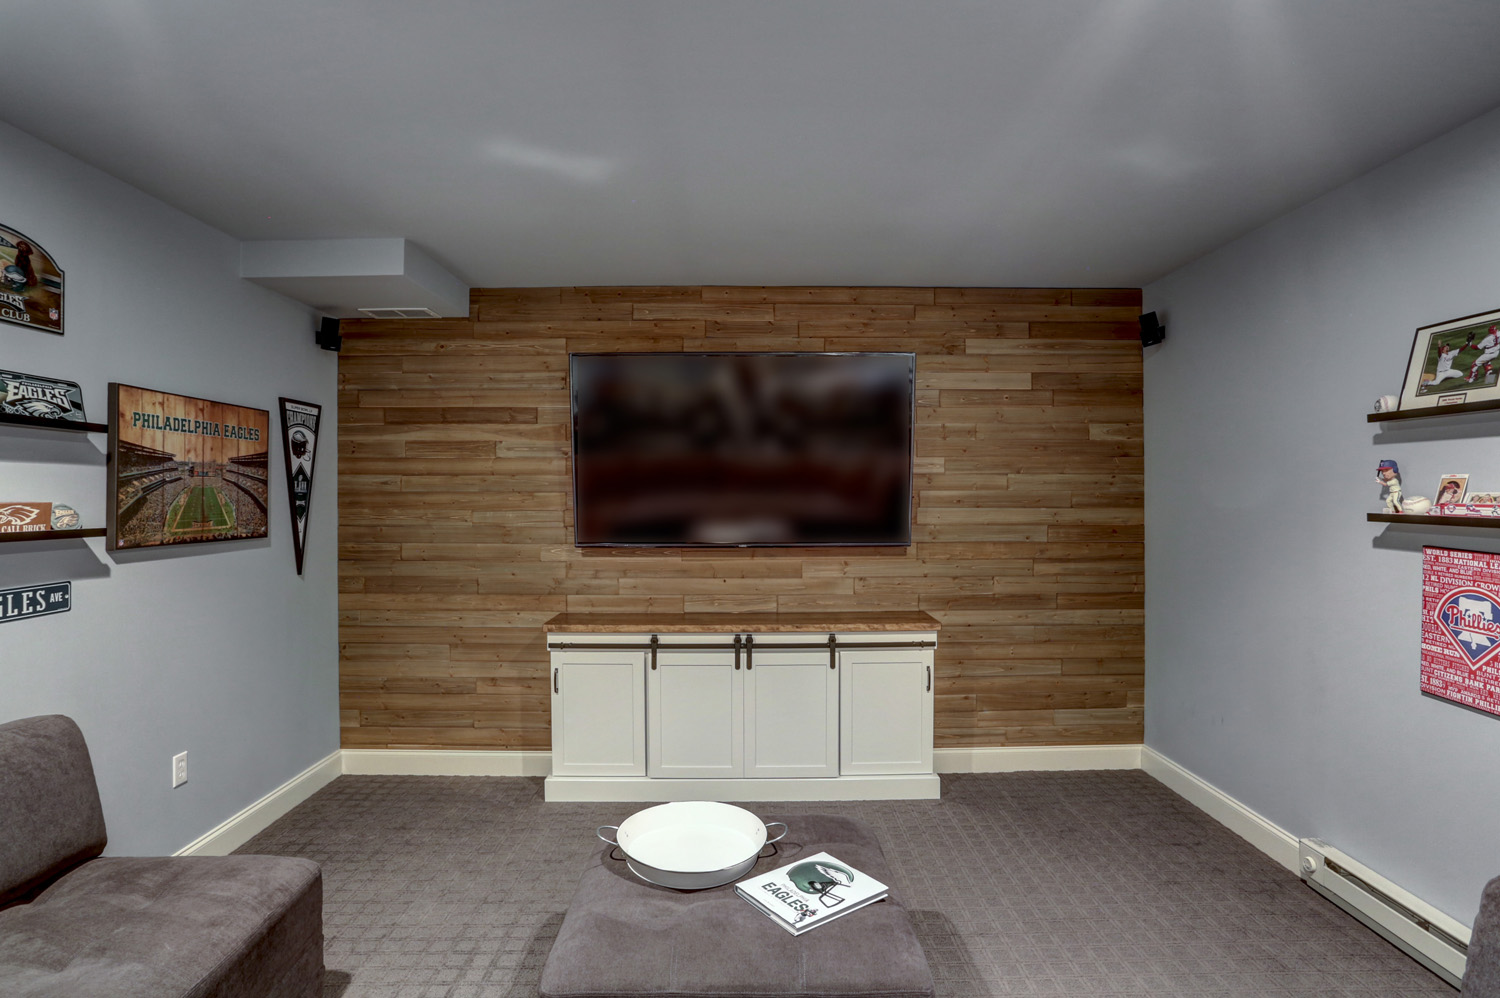 Lititz Basement Remodel with wooden accent wall